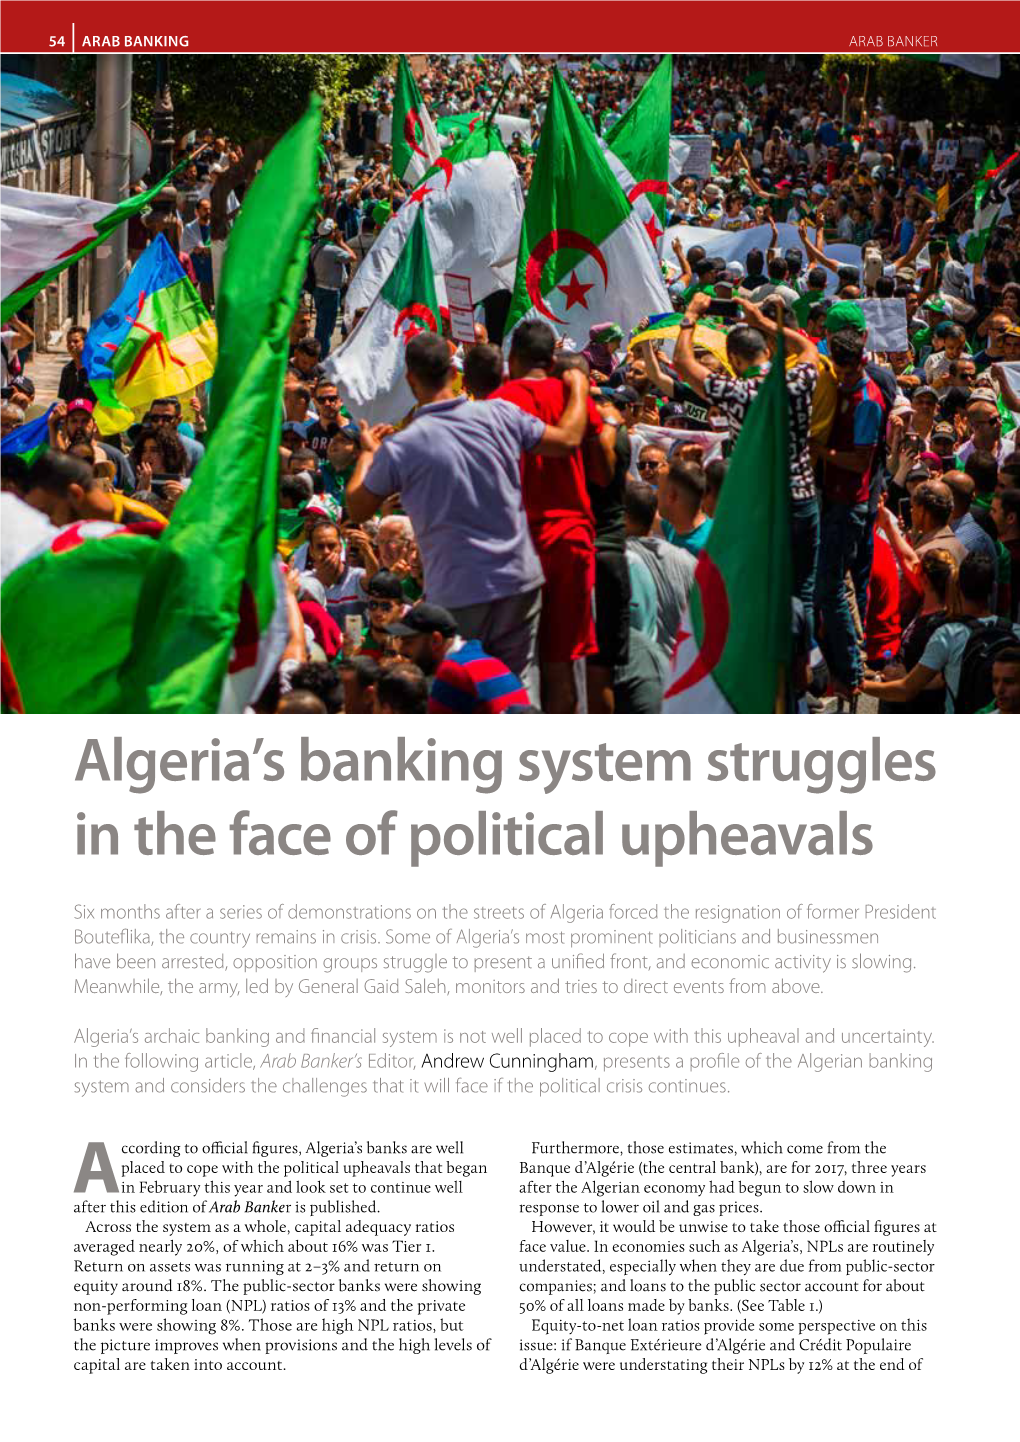 Algeria's Banking System Struggles in the Face of Political Upheavals